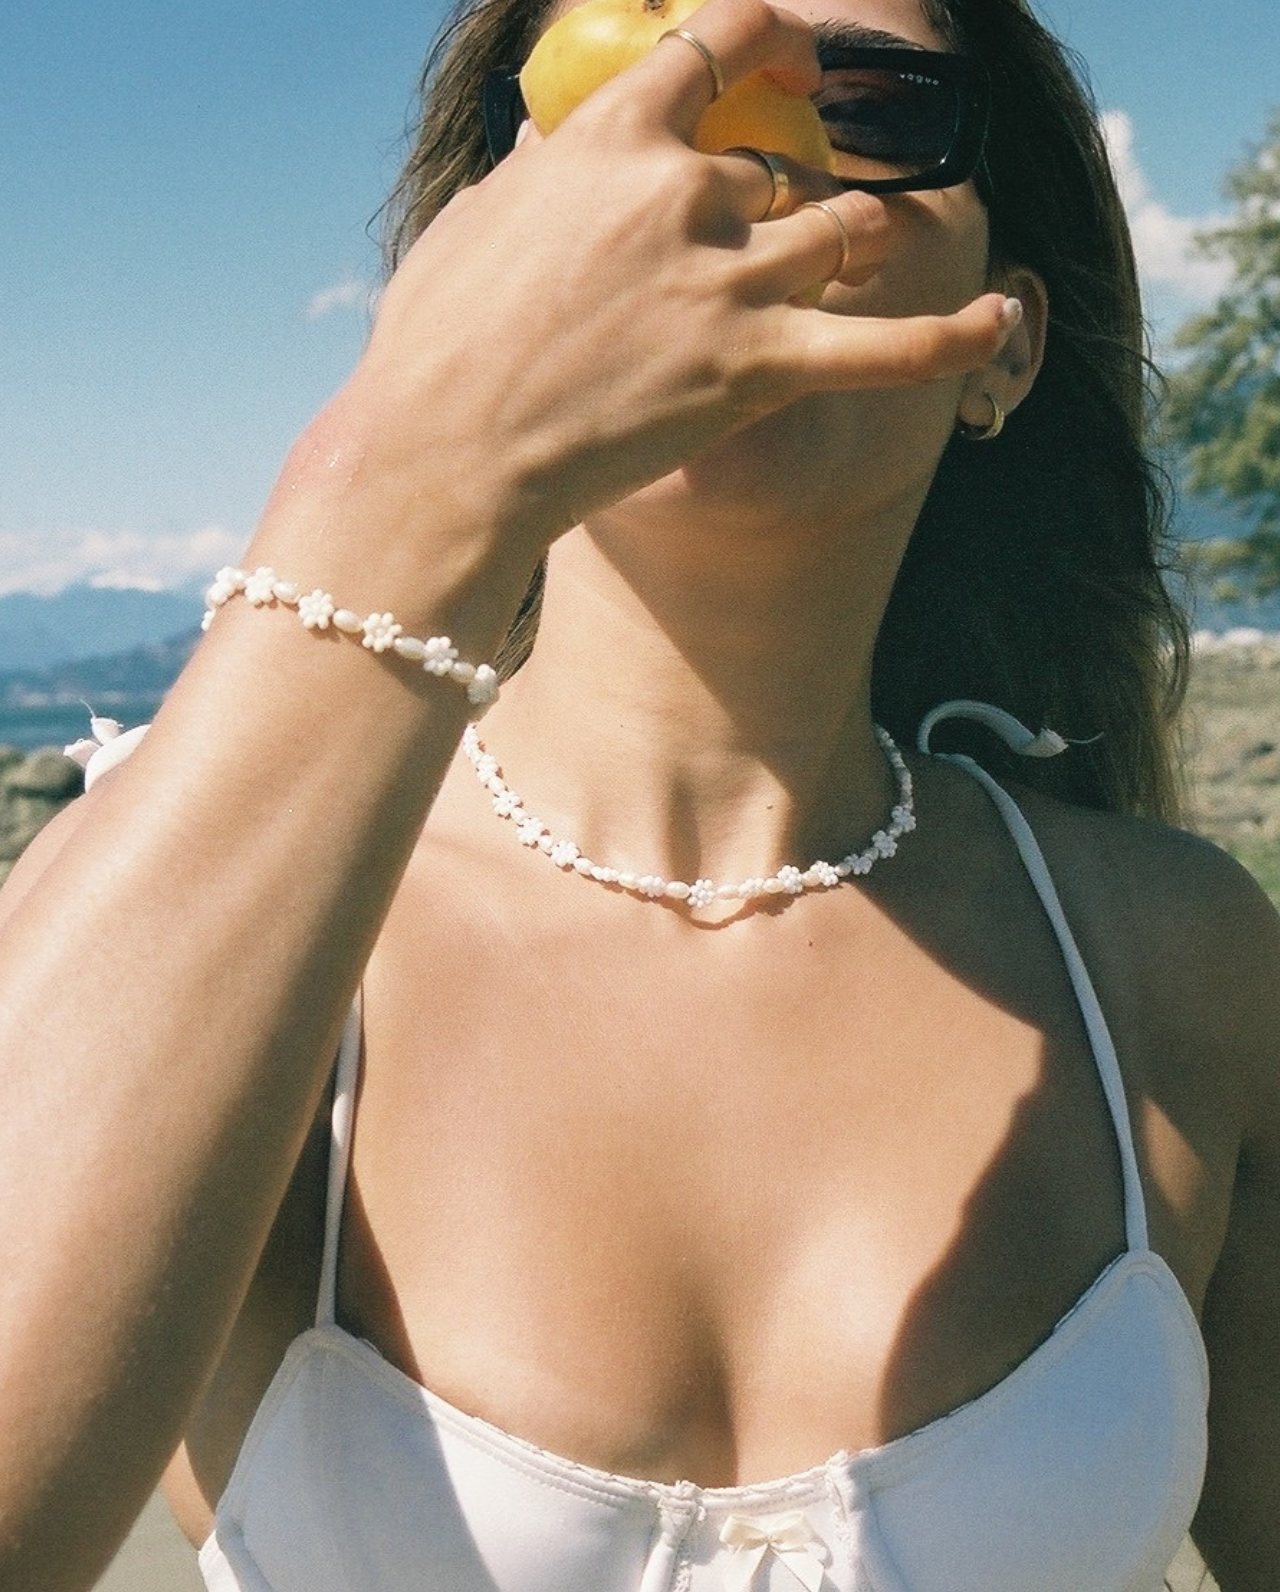 The Daisy Pearl Necklace